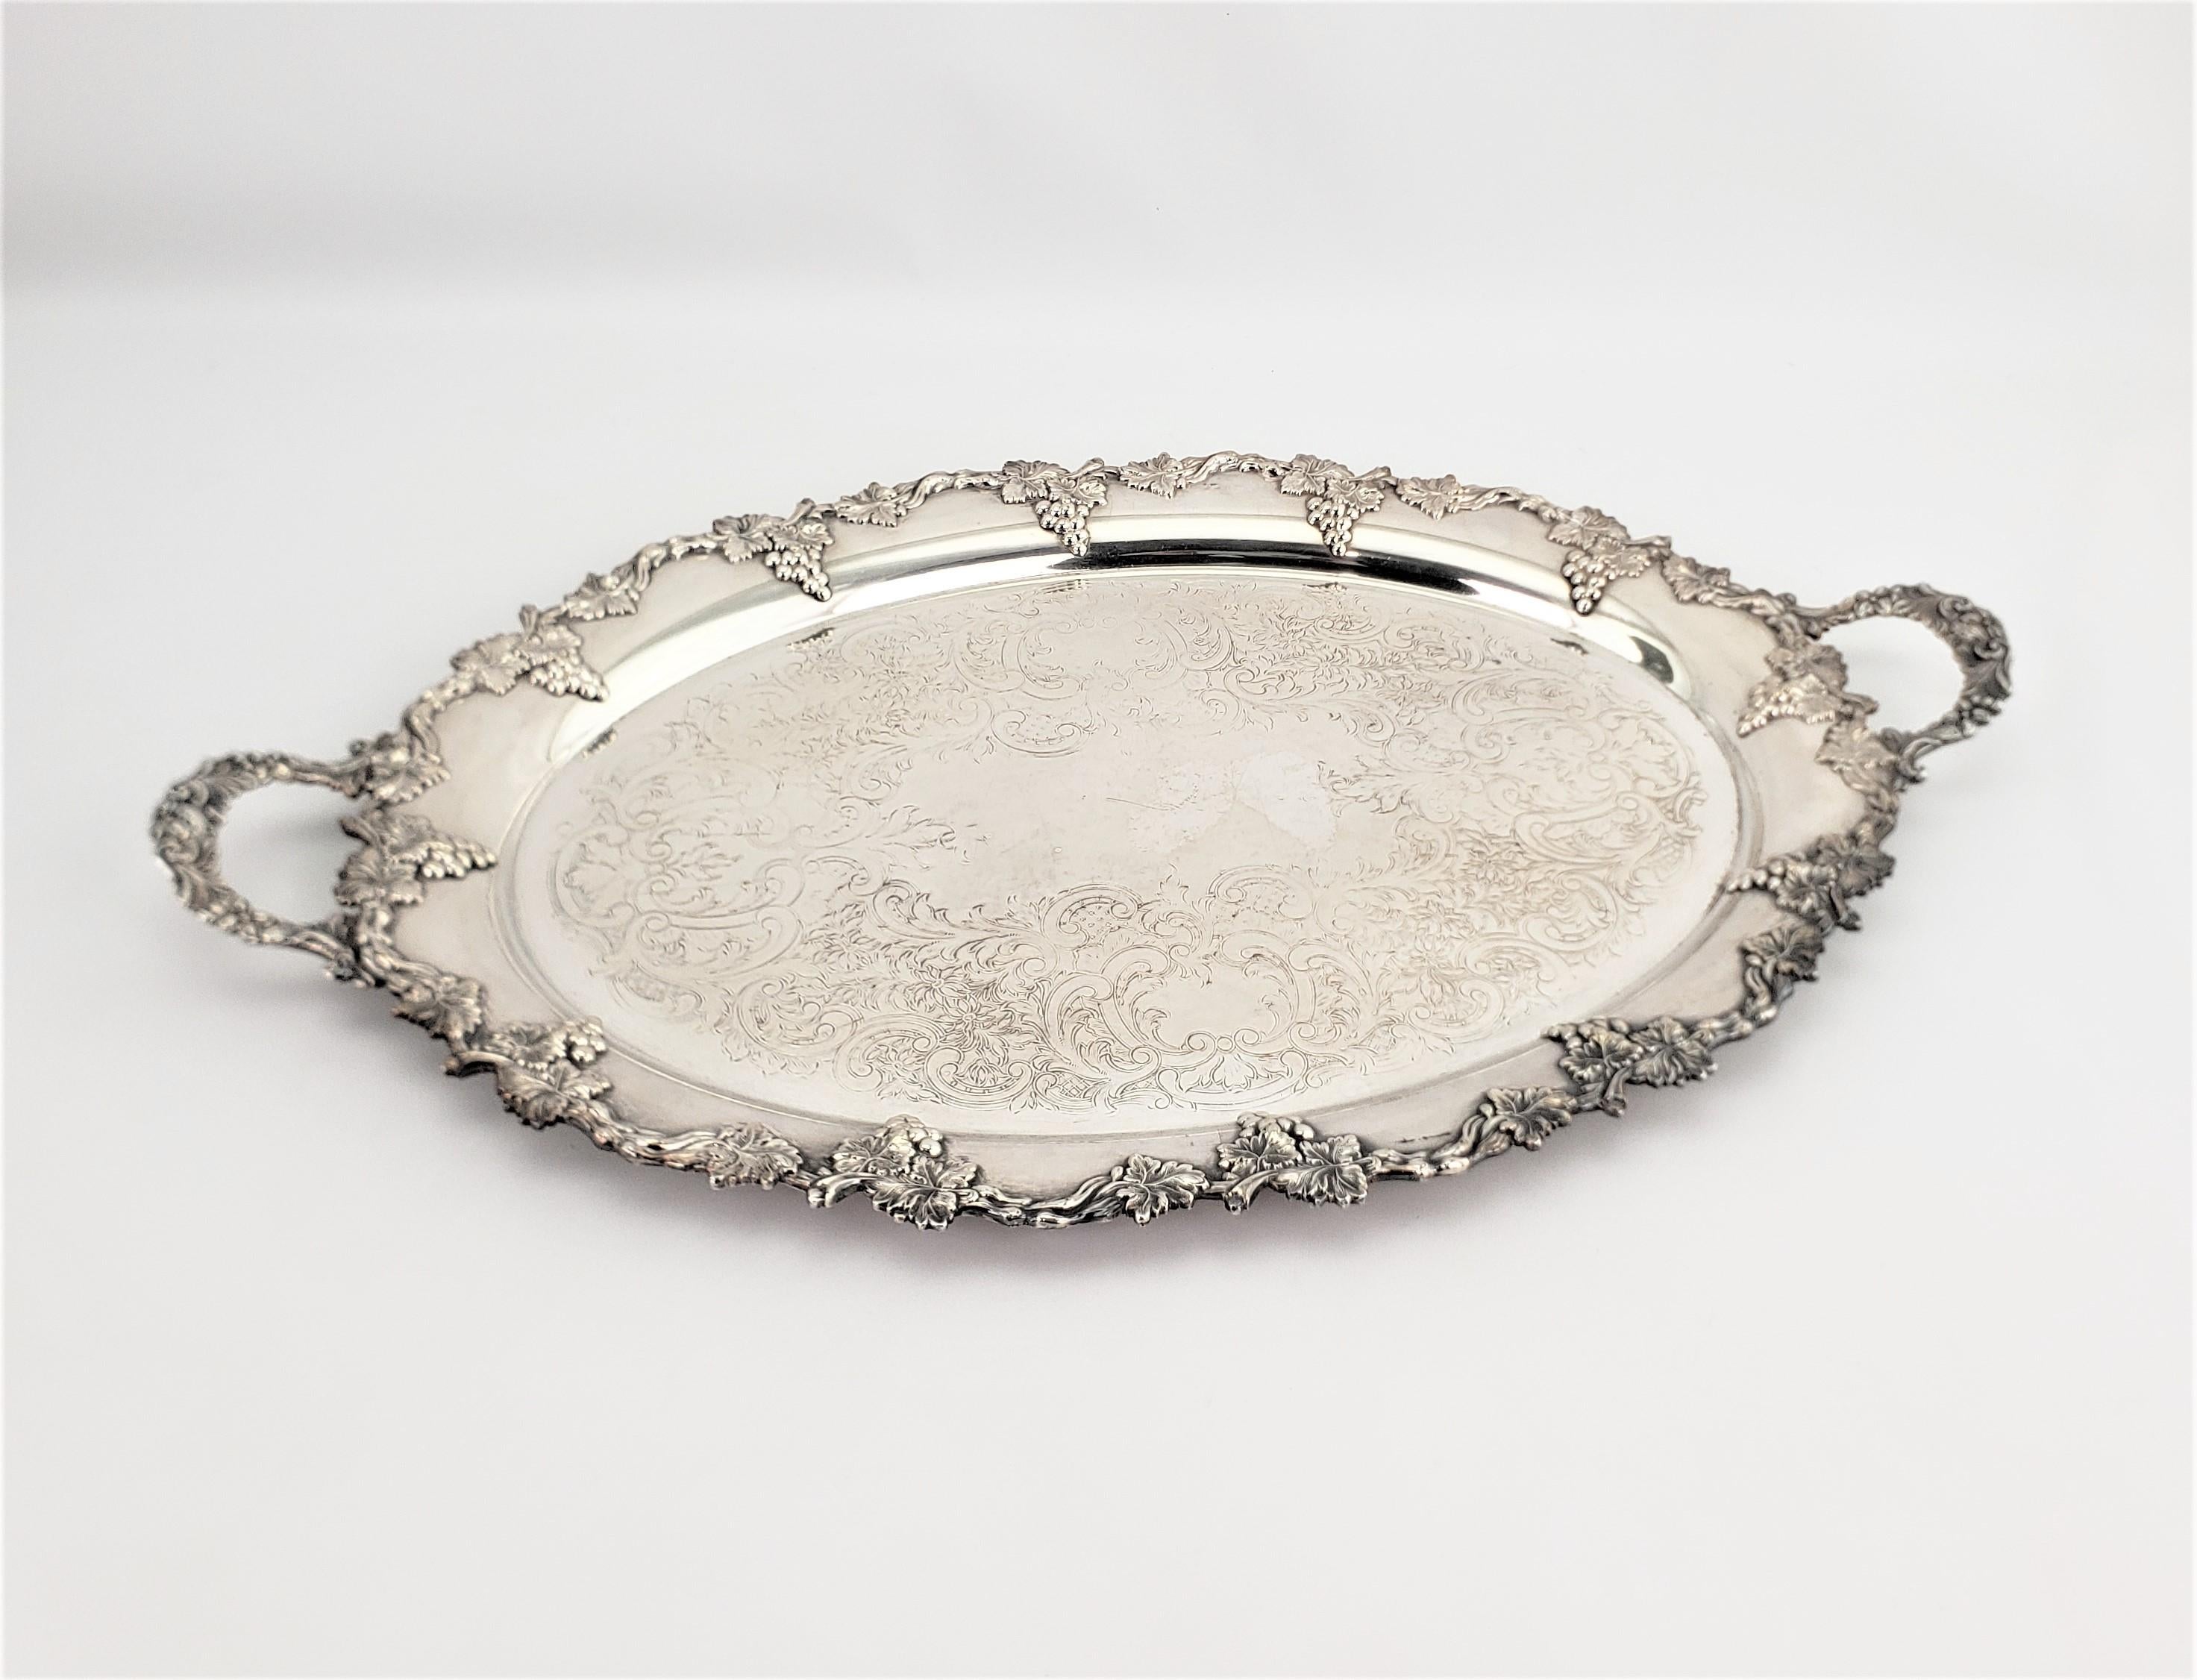 This oval silver plated serving tray was made in England by an unknown maker in approximately 1920 in a Victorian style. The tray is ornately decorated with a cast figural grape and leaf decoration on the surround and replicated on the handles. The